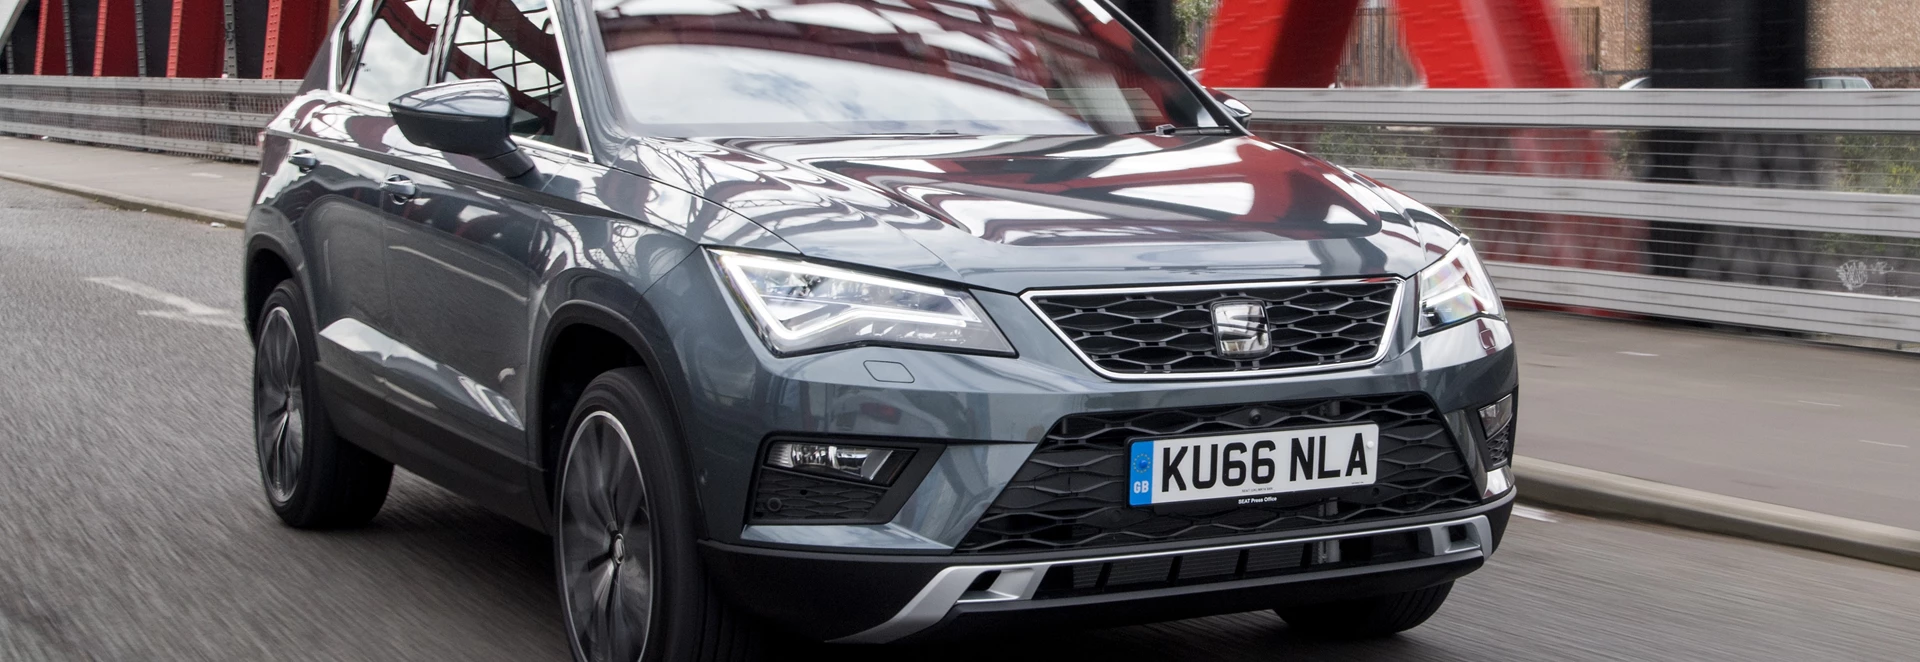 SEAT Ateca 2.0 TDI 4Drive XCELLENCE SUV review 